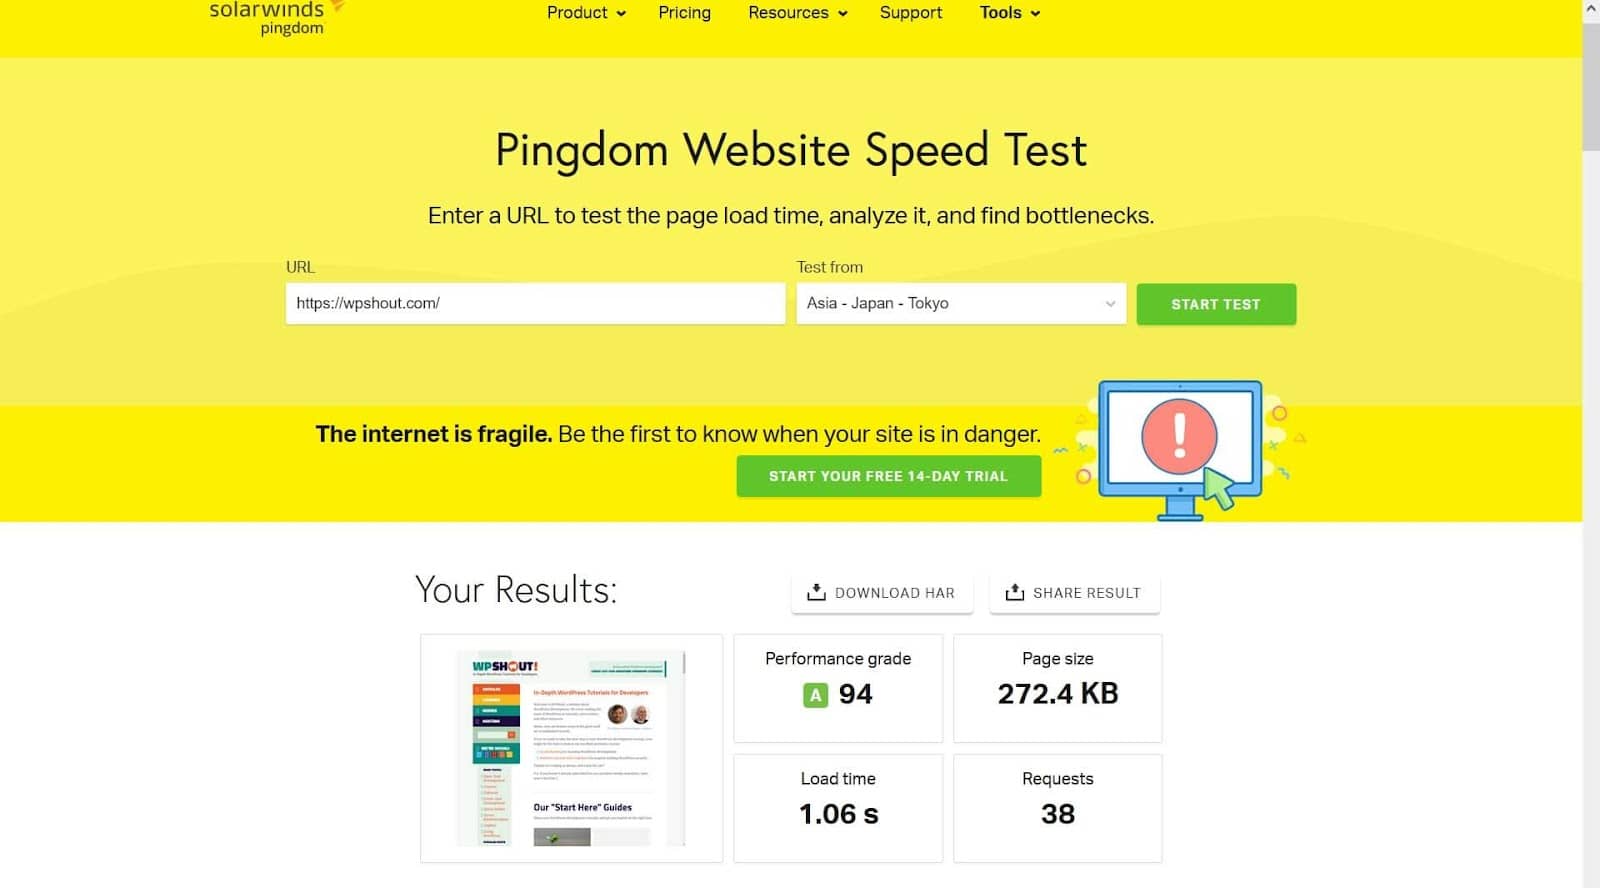 Pingdom Website Speed Test for WPShout from Tokyo